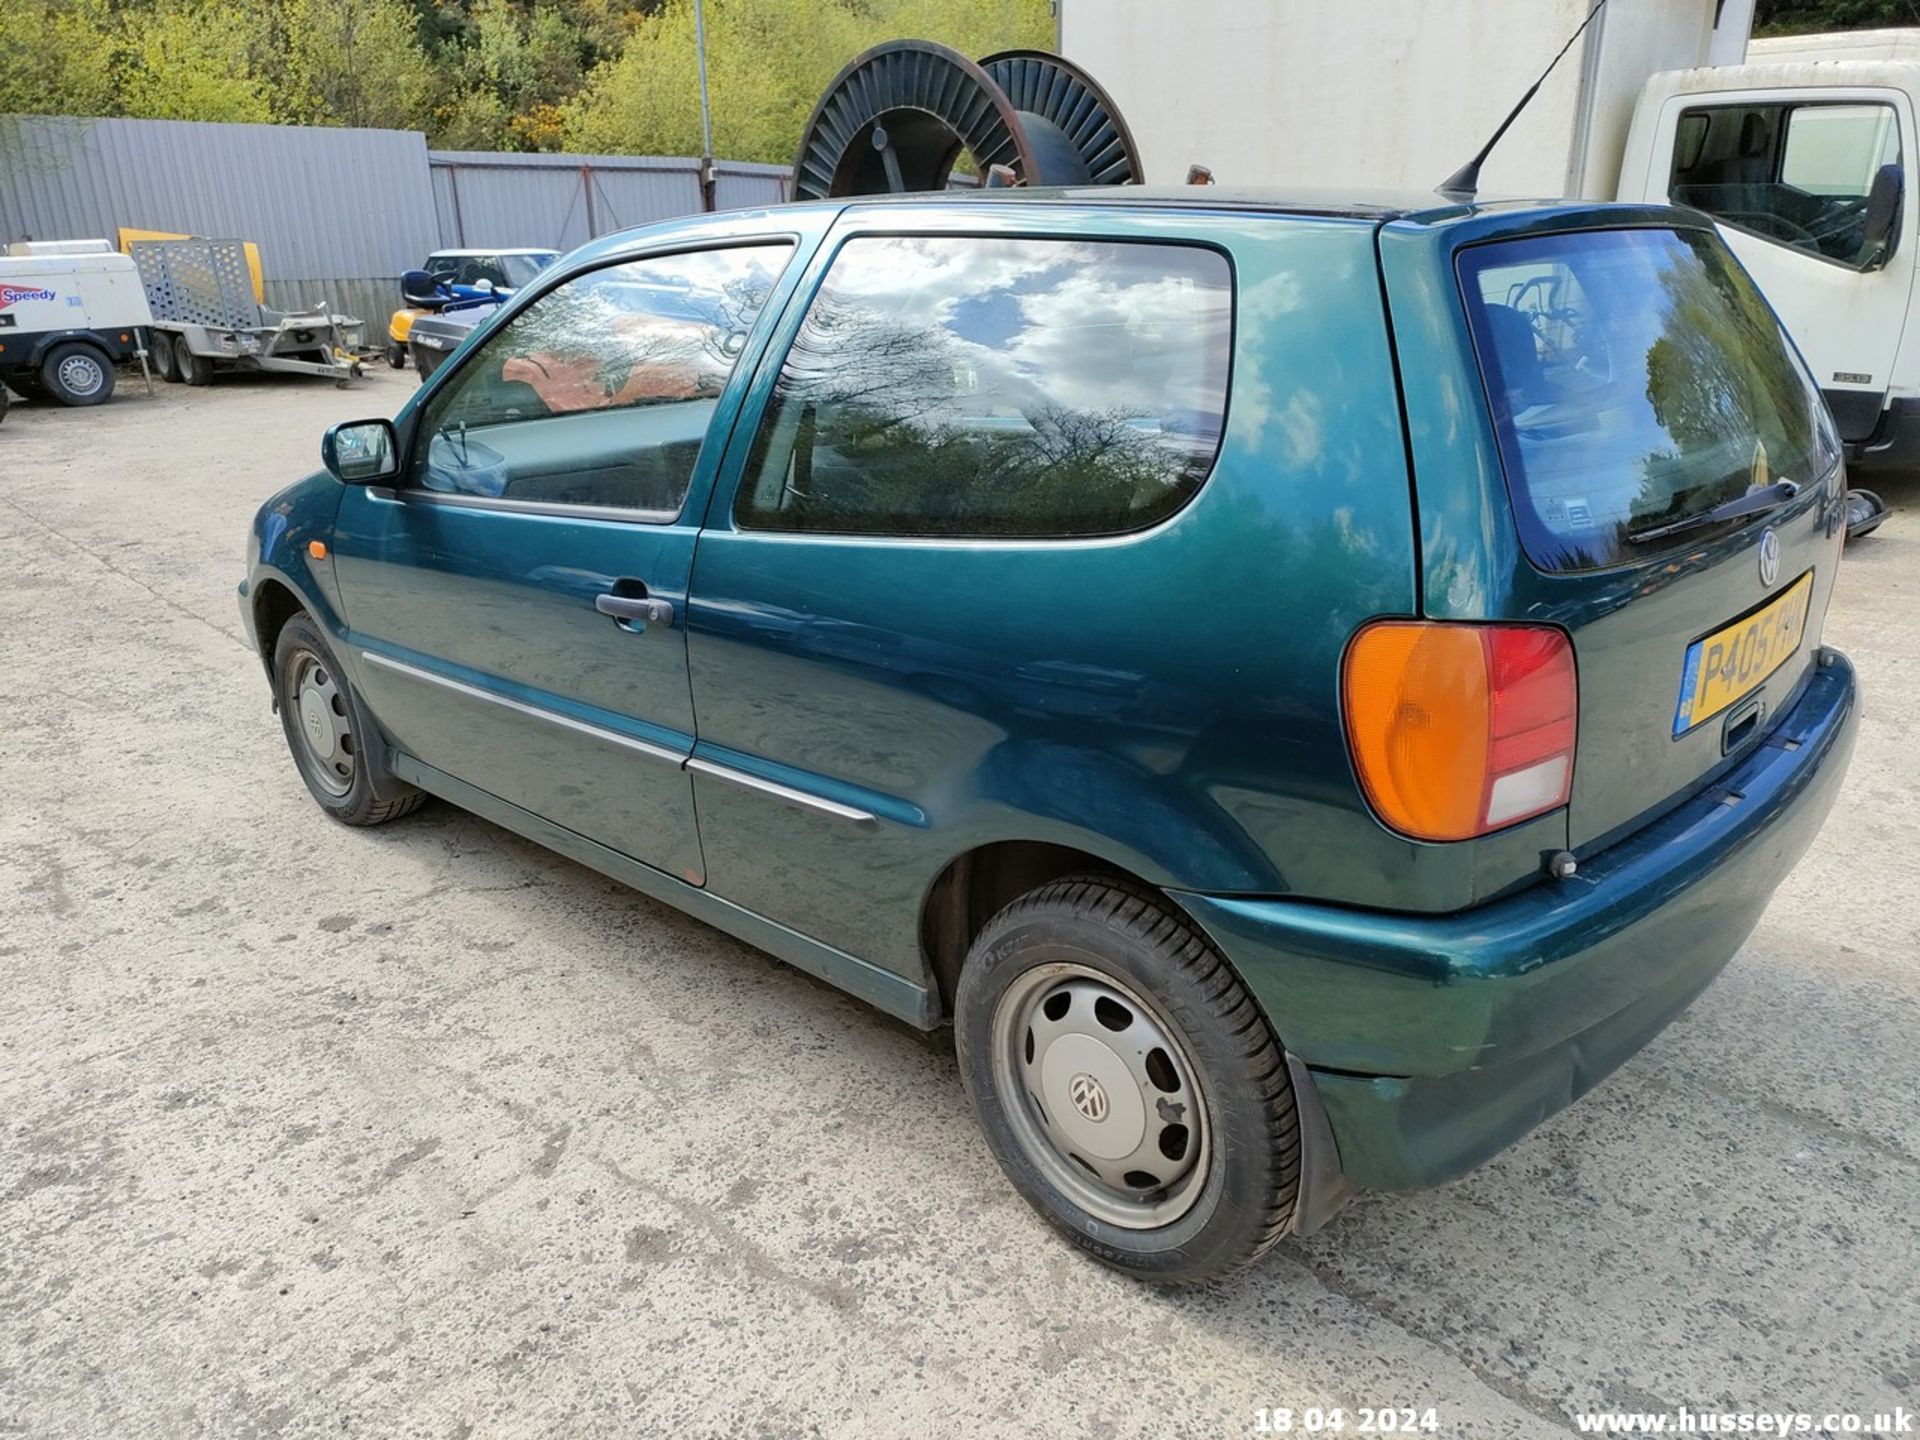 1997 VOLKSWAGEN POLO 1.4 CL AUTO - 1390cc 3dr Hatchback (Green, 68k) - Image 19 of 60